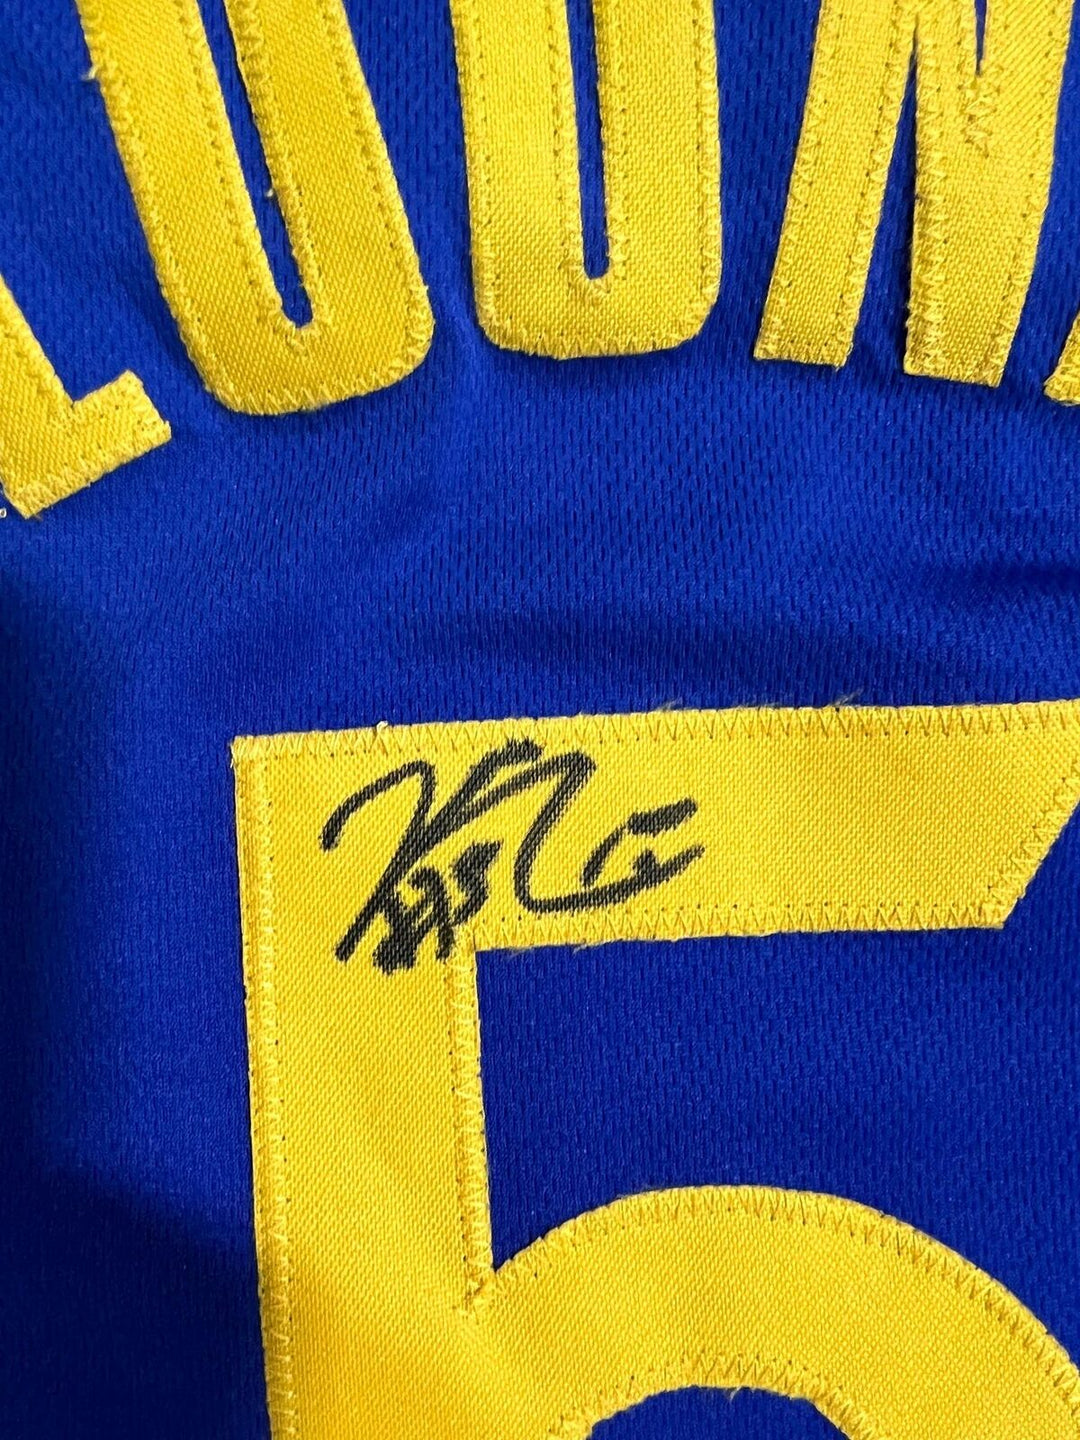 Kevon Looney signed jersey PSA Golden State Warriors Autographed Image 2